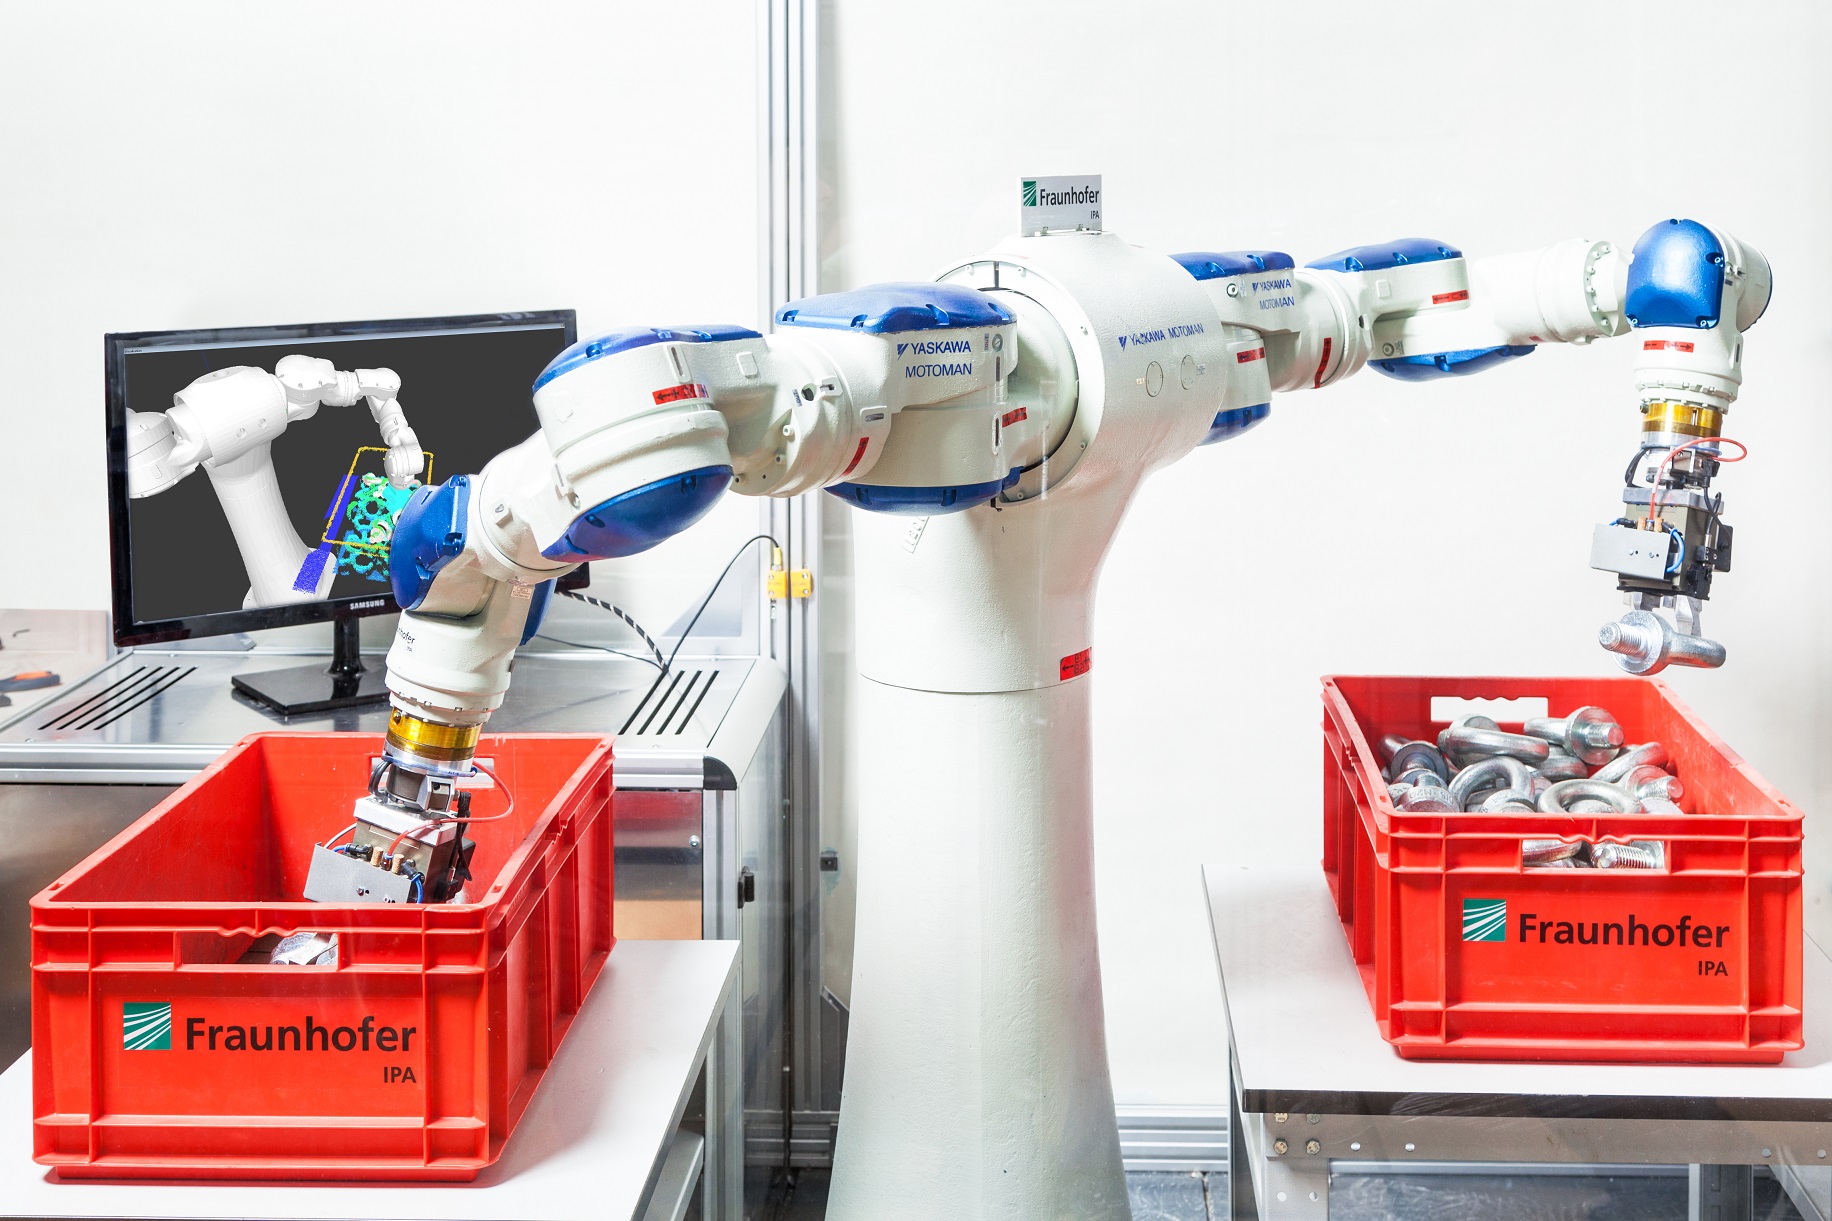 Two-arm robot carries out bin picking